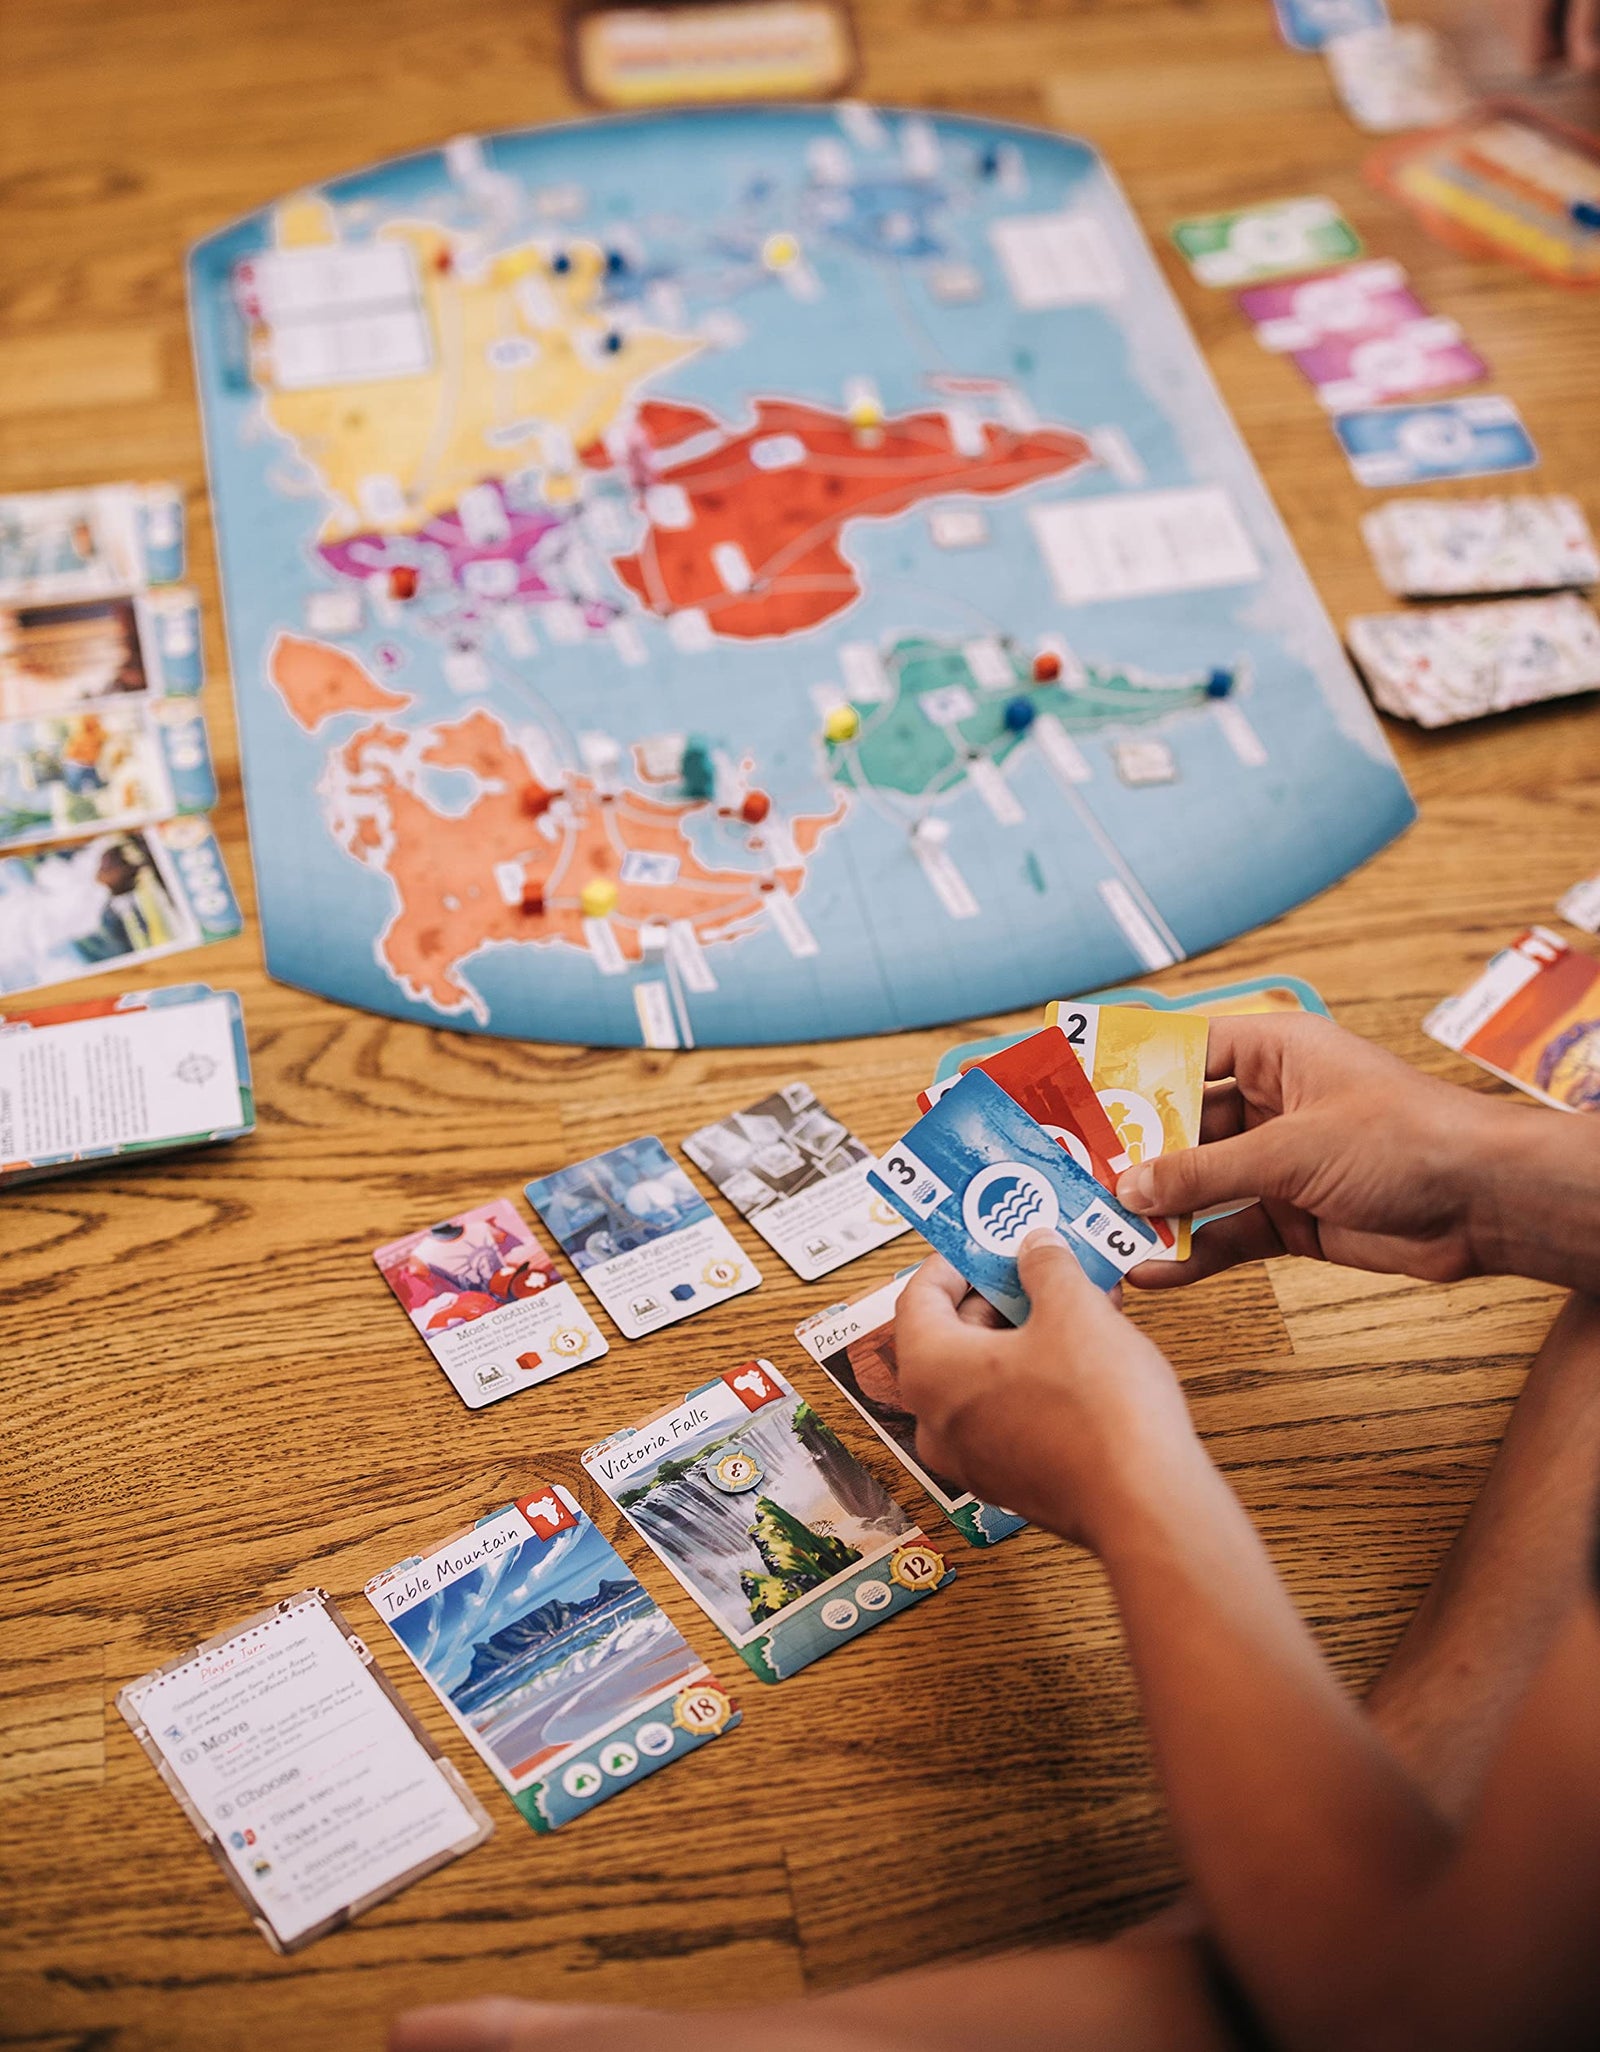 Trekking The World: A Family Board Game Perfect for Your Next Family Game Night / One of The Best Board Games for Adults and Family / from The Creators of Trekking The National Parks